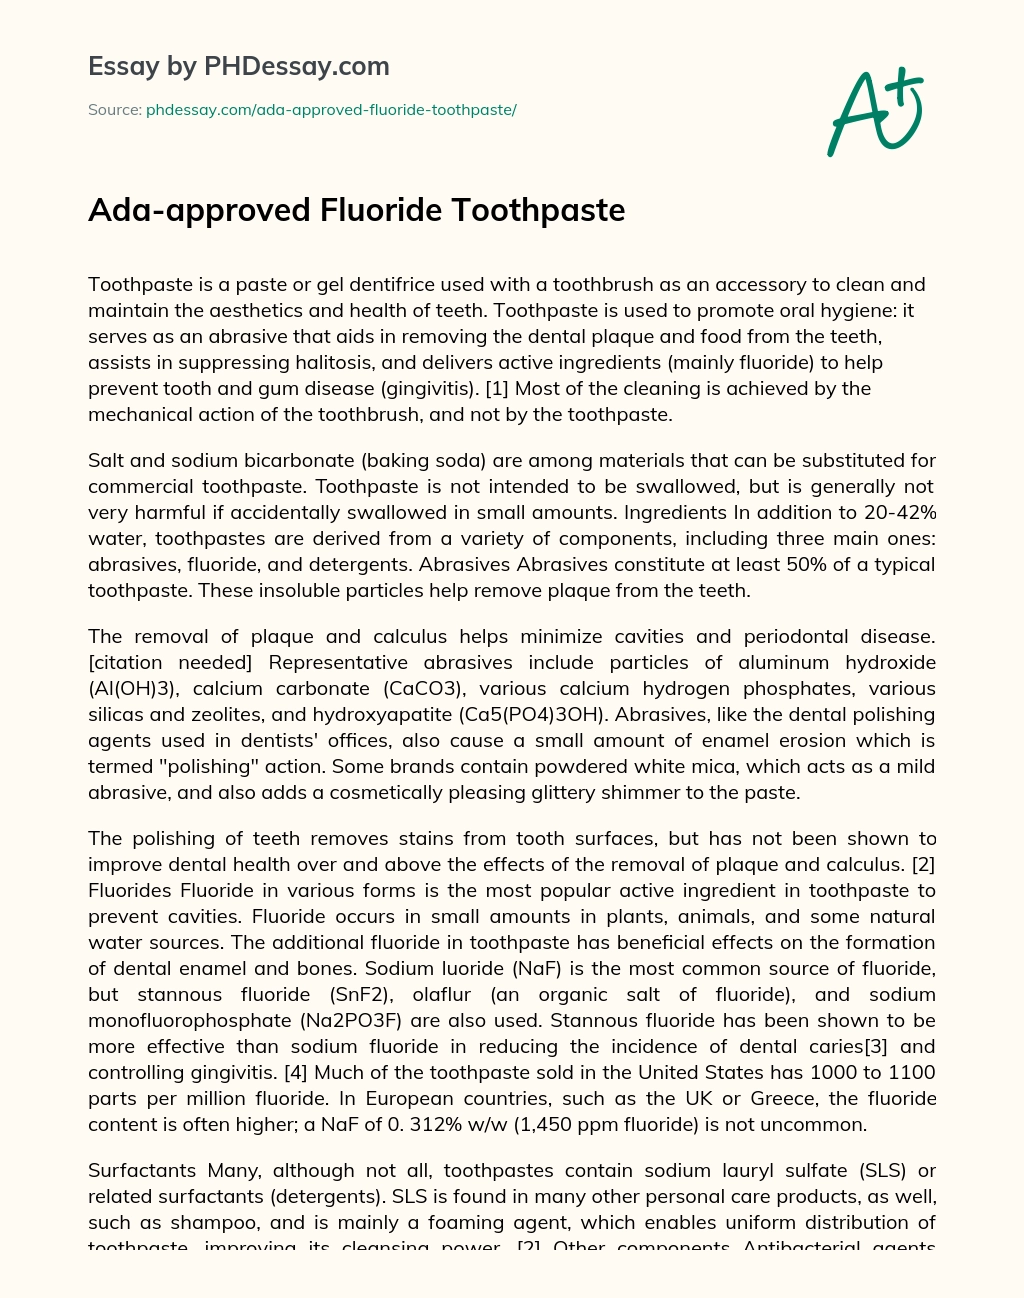 Ada-approved Fluoride Toothpaste essay